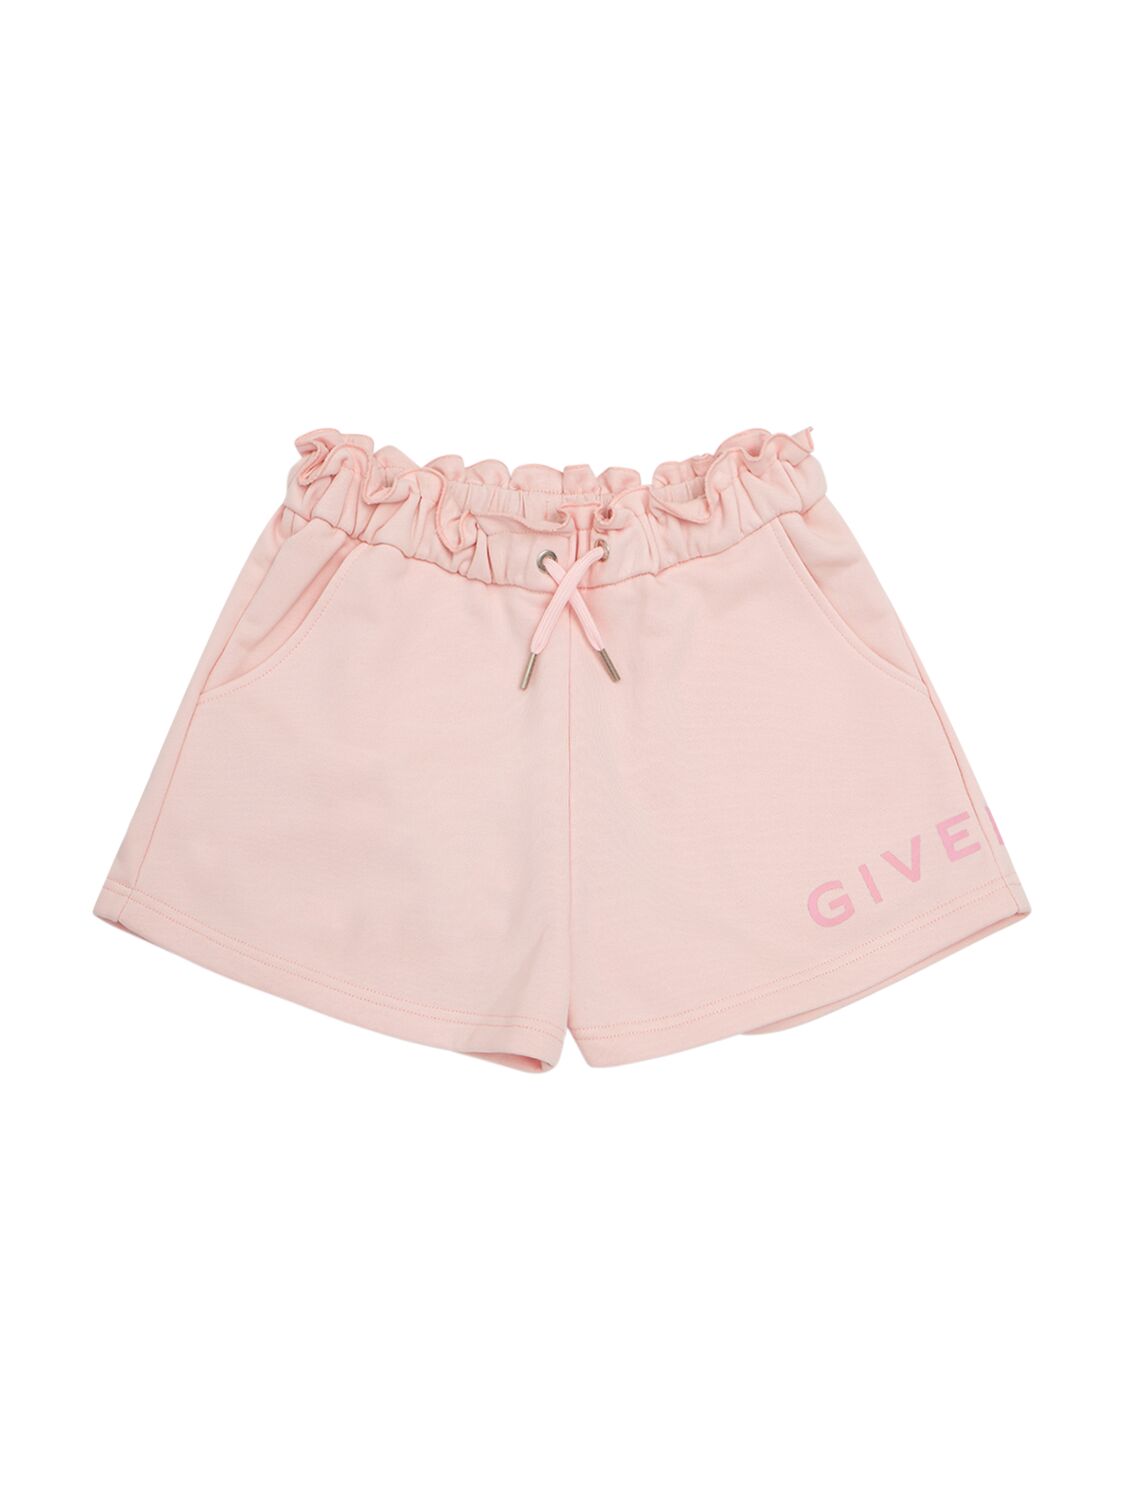 Givenchy Cotton Blend Shorts In Pink